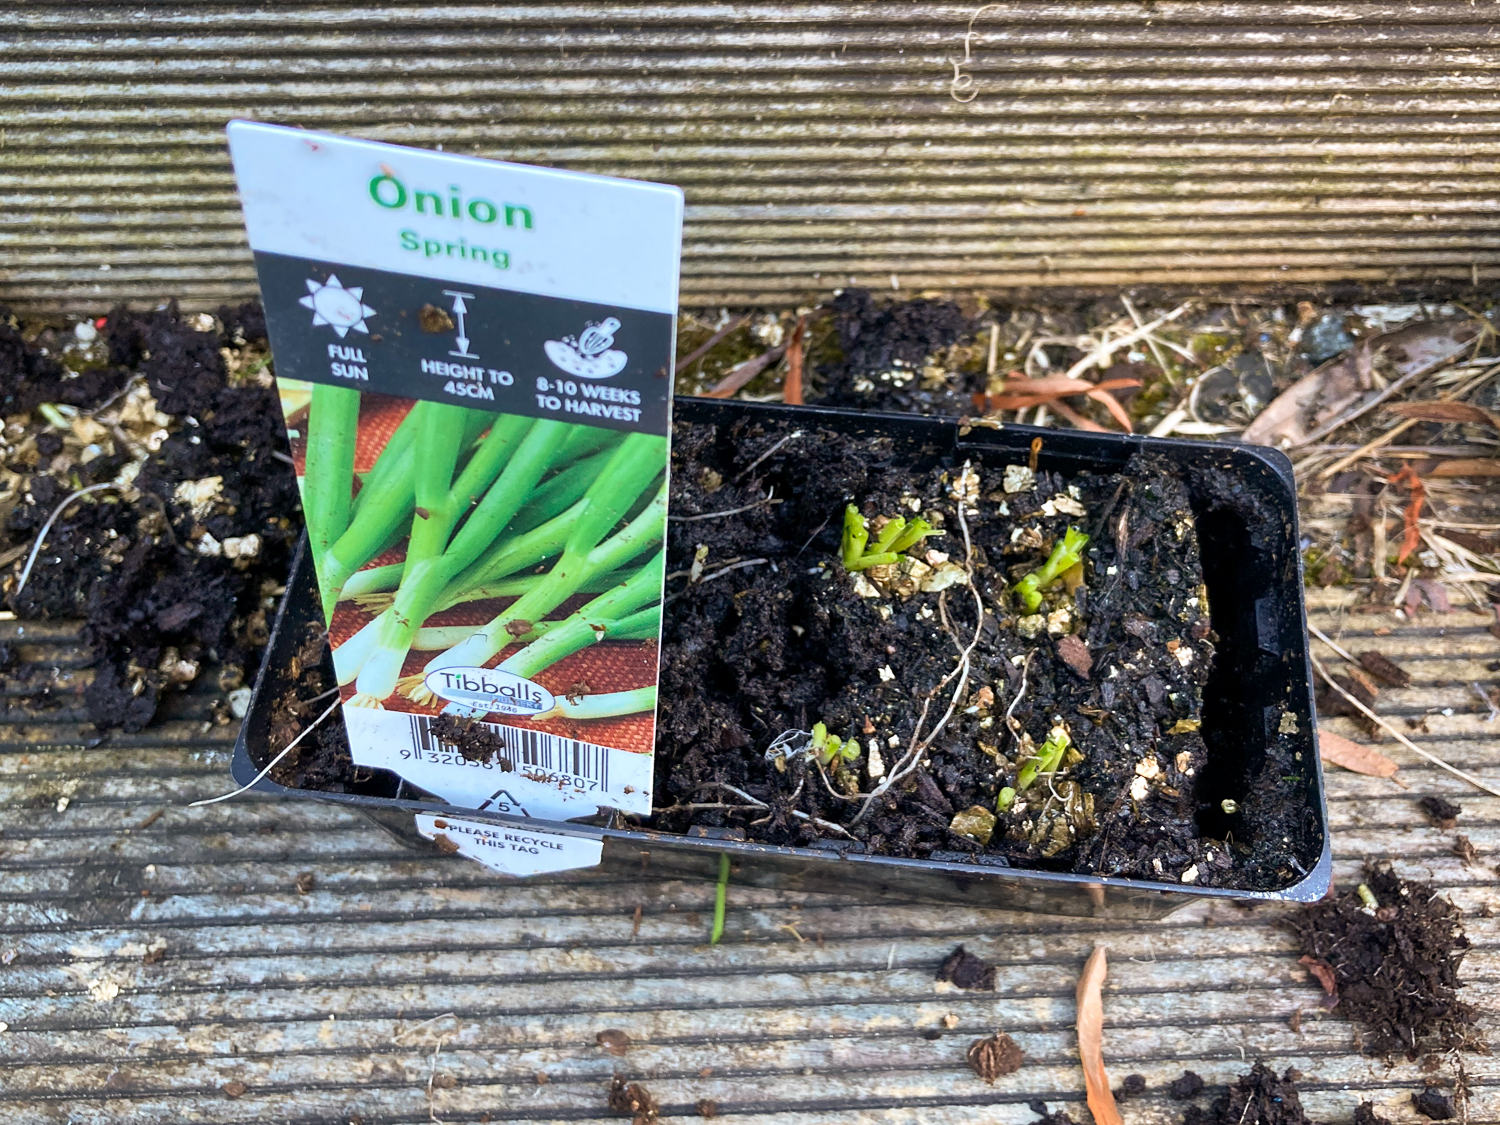 A punnet of spring onion seedlings destroyed by being eaten by a possum